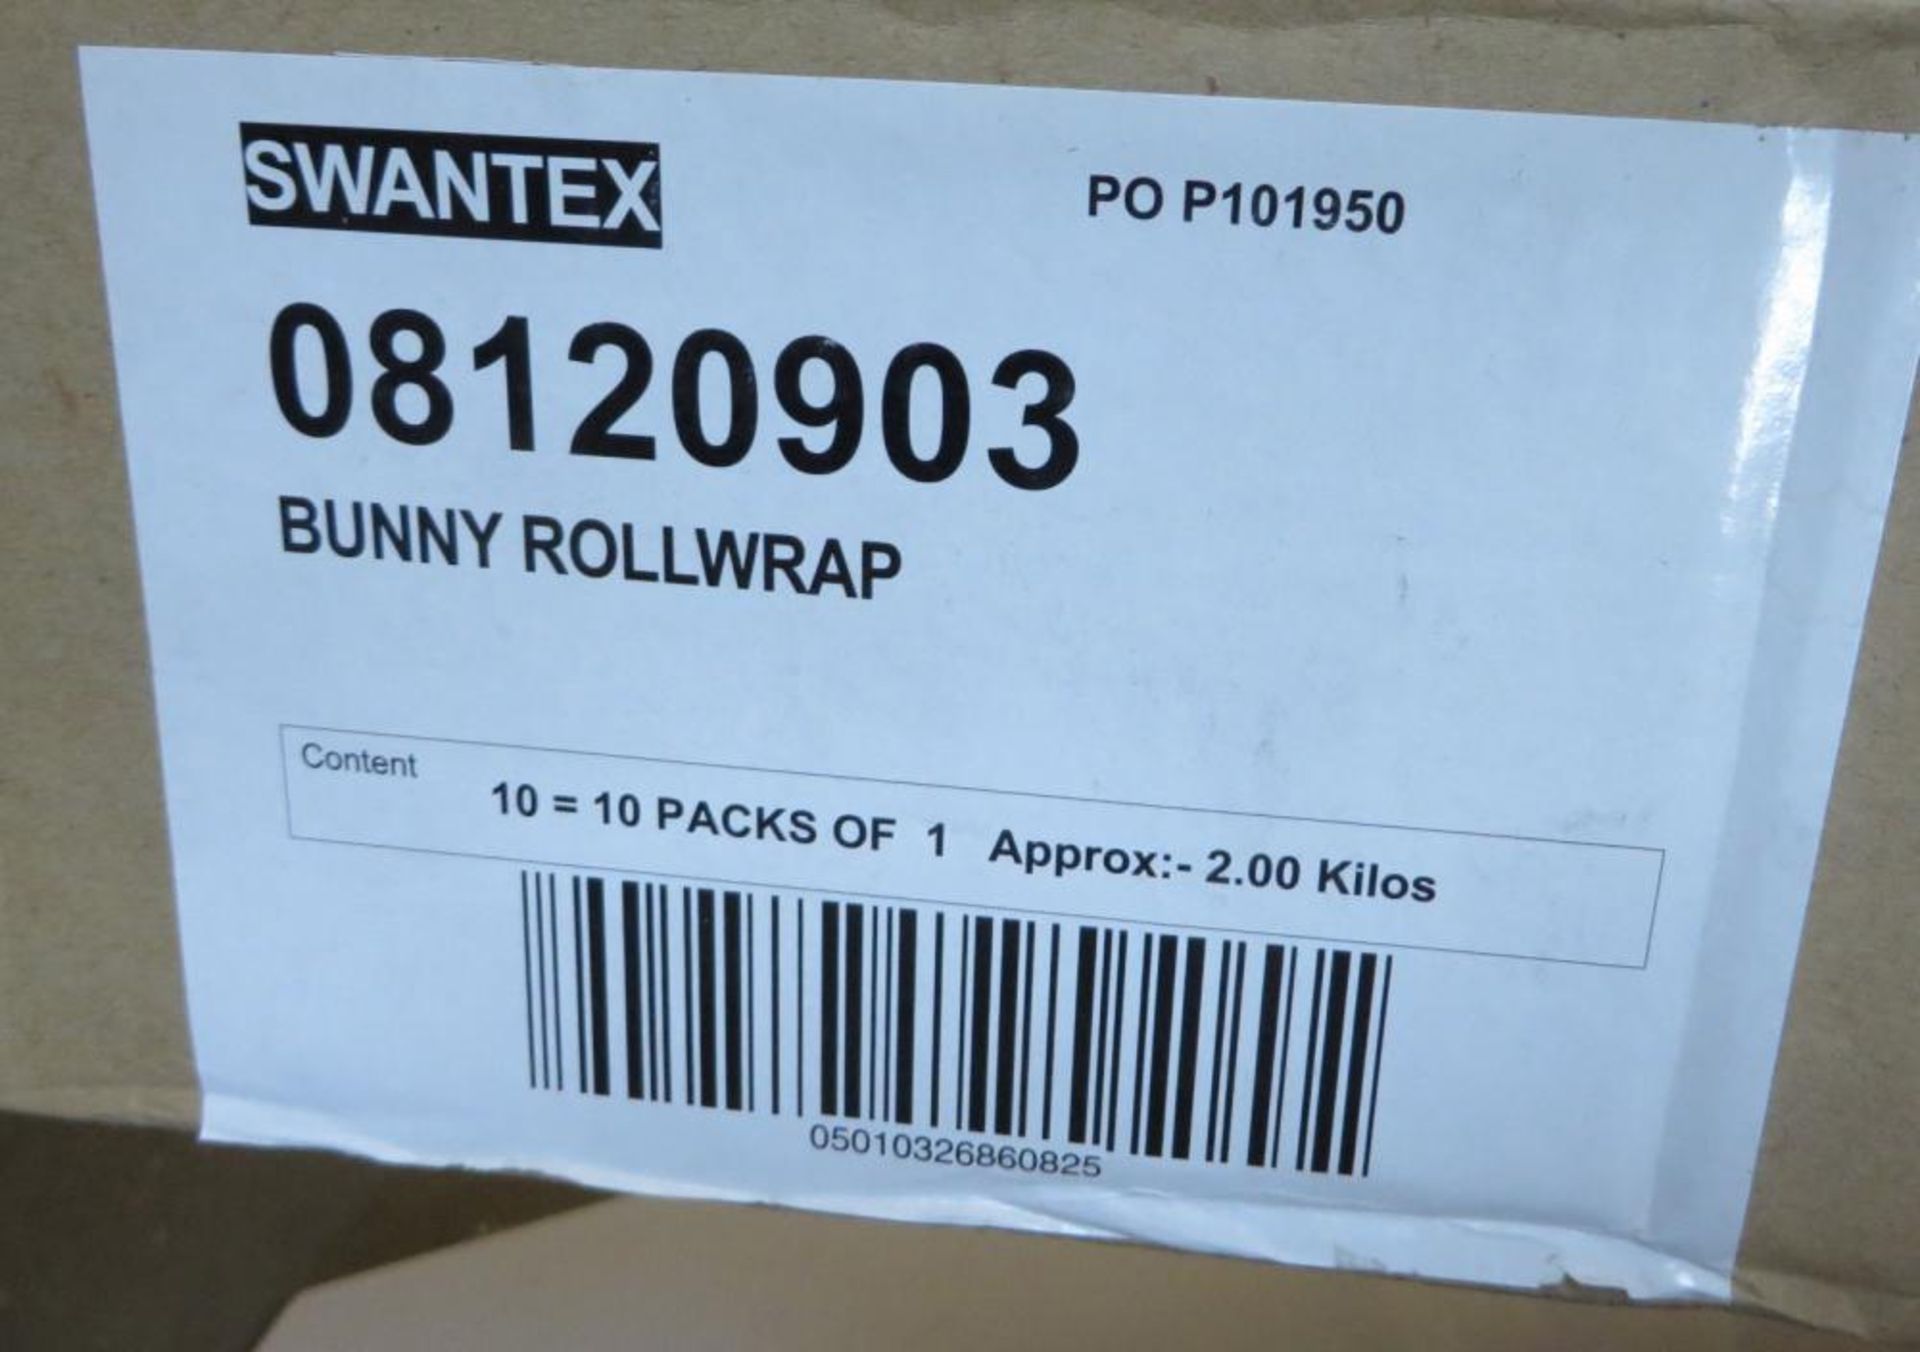 9 x Rolls of Bunny Wrap Wrapping Paper - CL185 - Ref: DRT0685 - Location: Stoke ST3 - Image 5 of 5